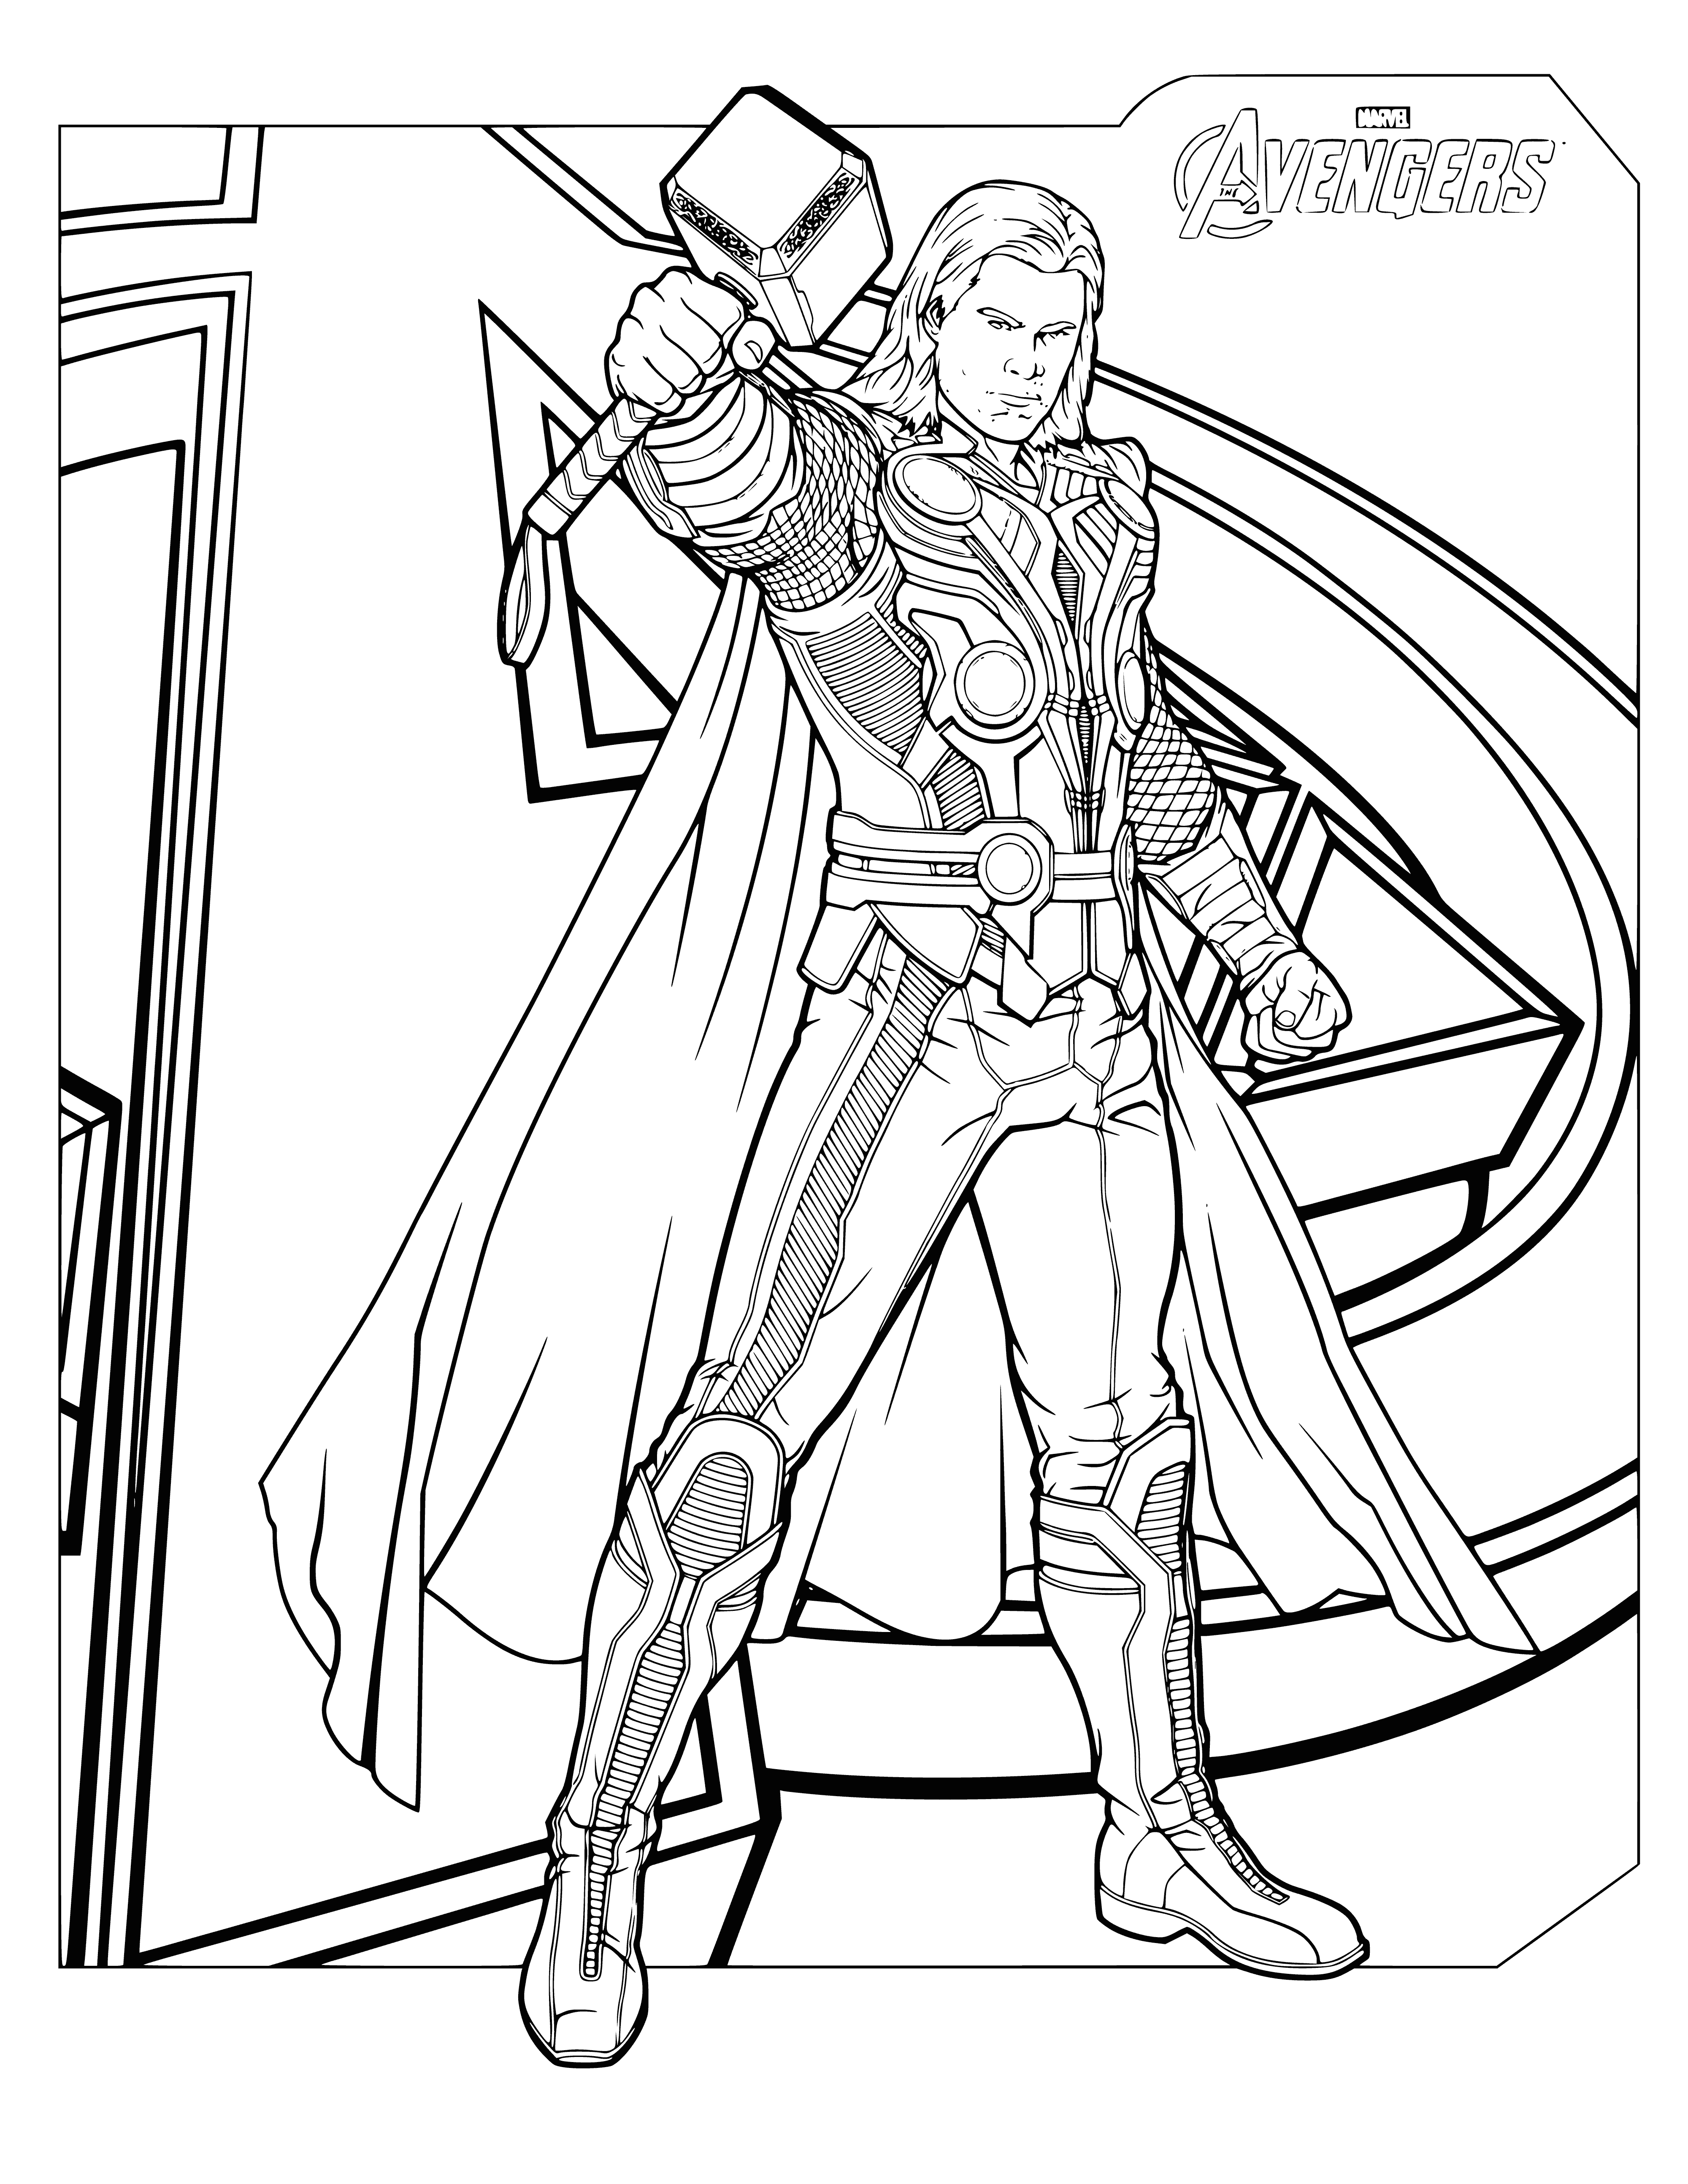 coloring page: Man stands in desert, wearing blue cape and metal skullcap, holding a large hammer in one hand and the other clenched in a fist.